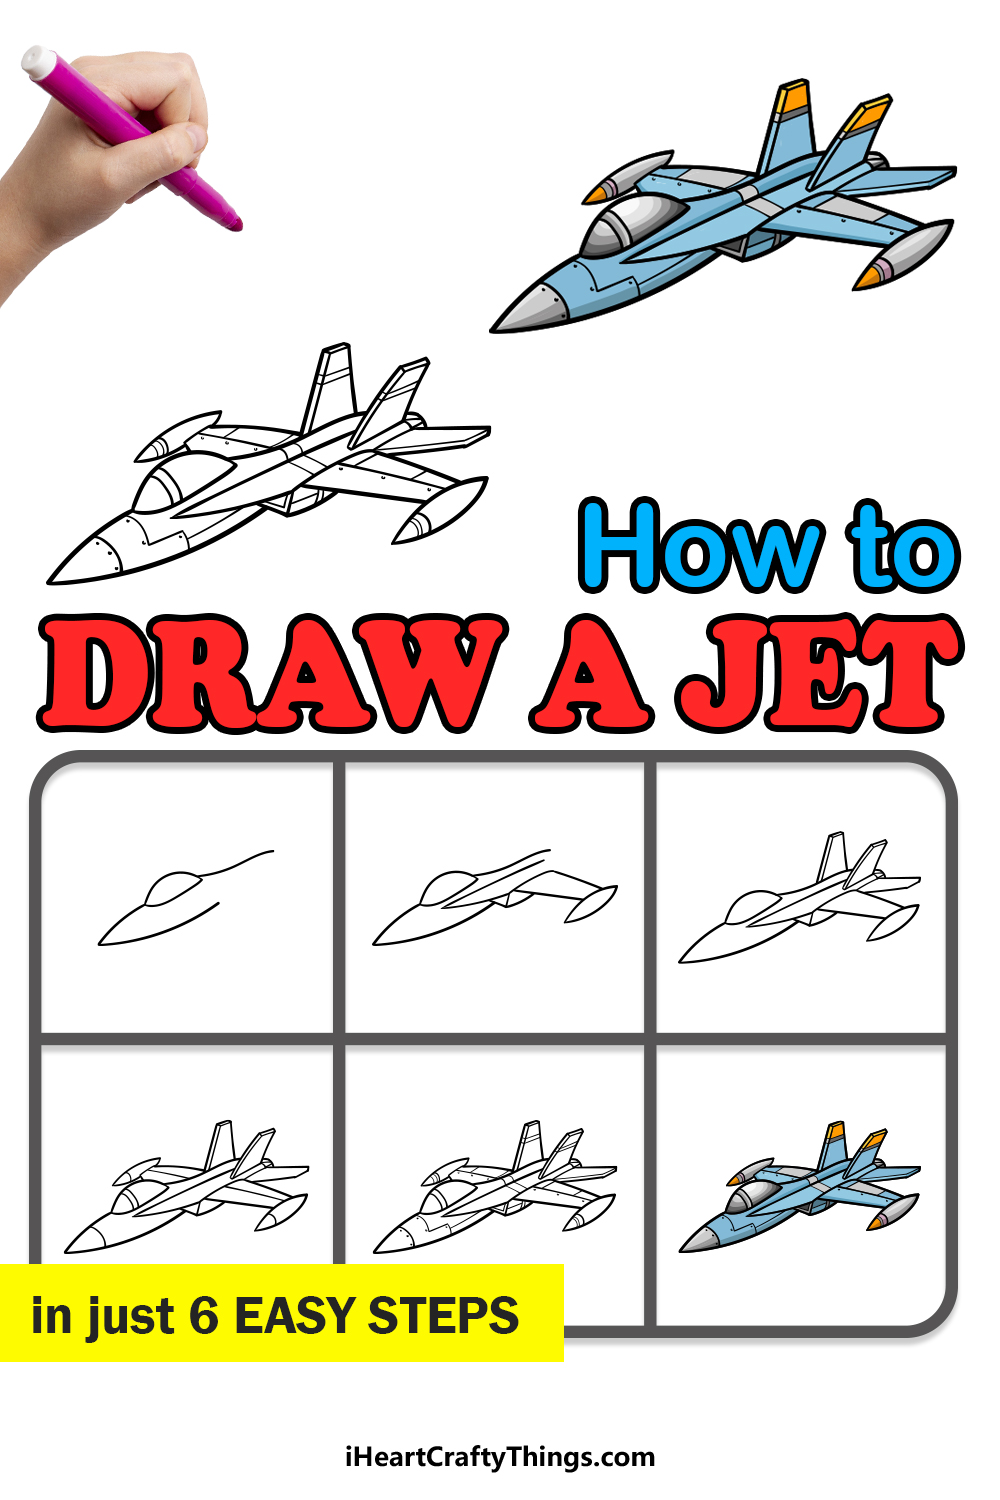 how to draw a Jet in 6 easy steps